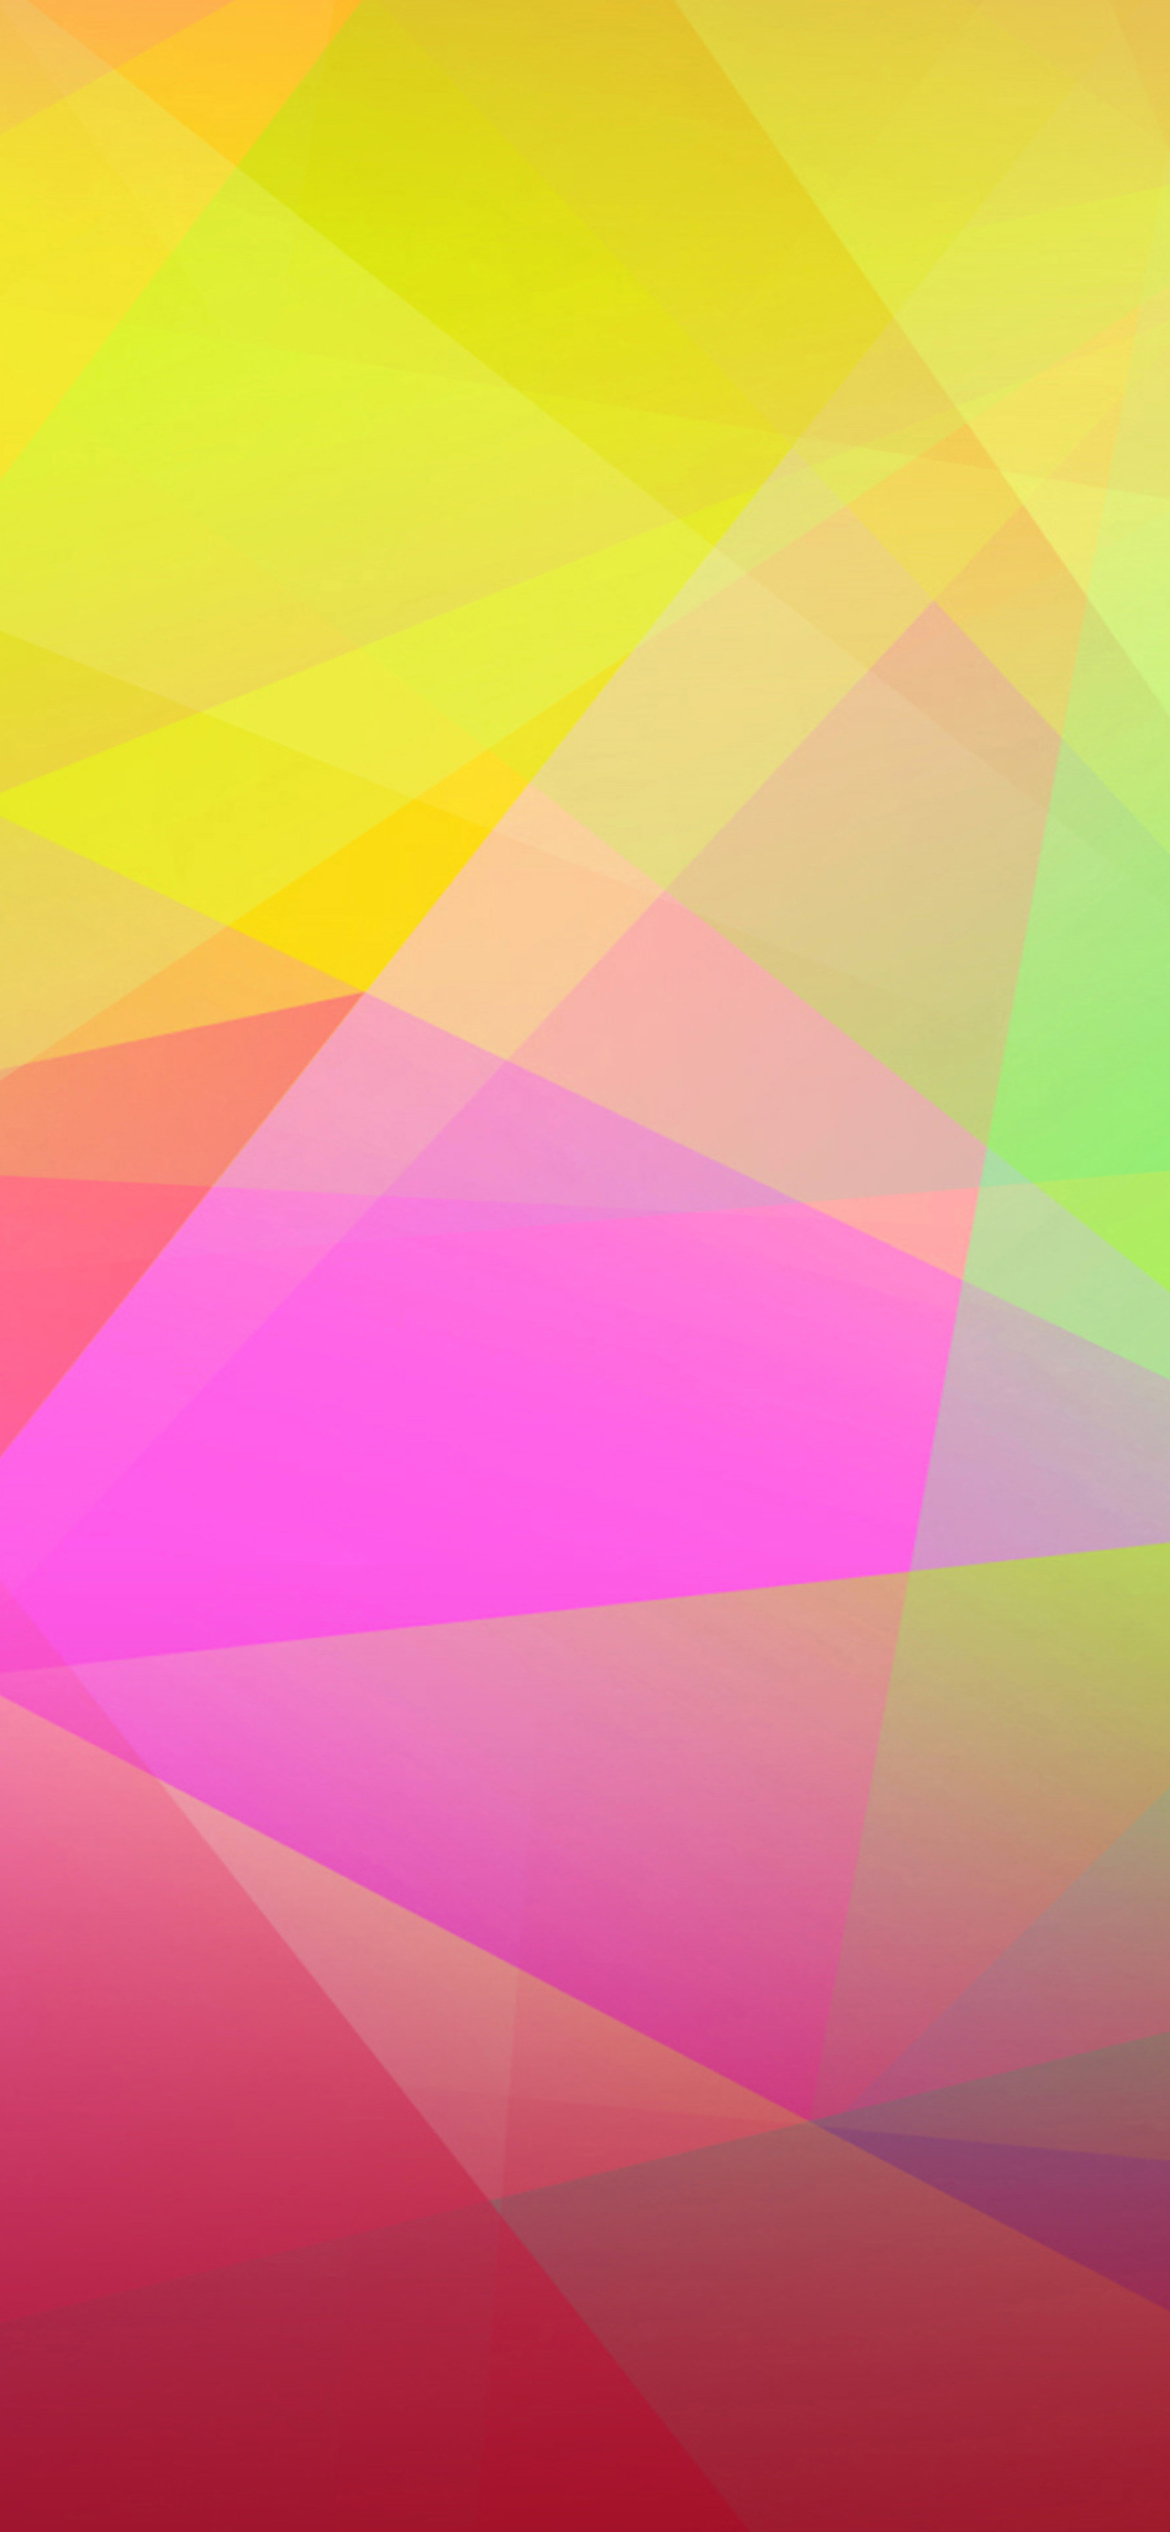 Glowing Abstract wallpaper 1170x2532